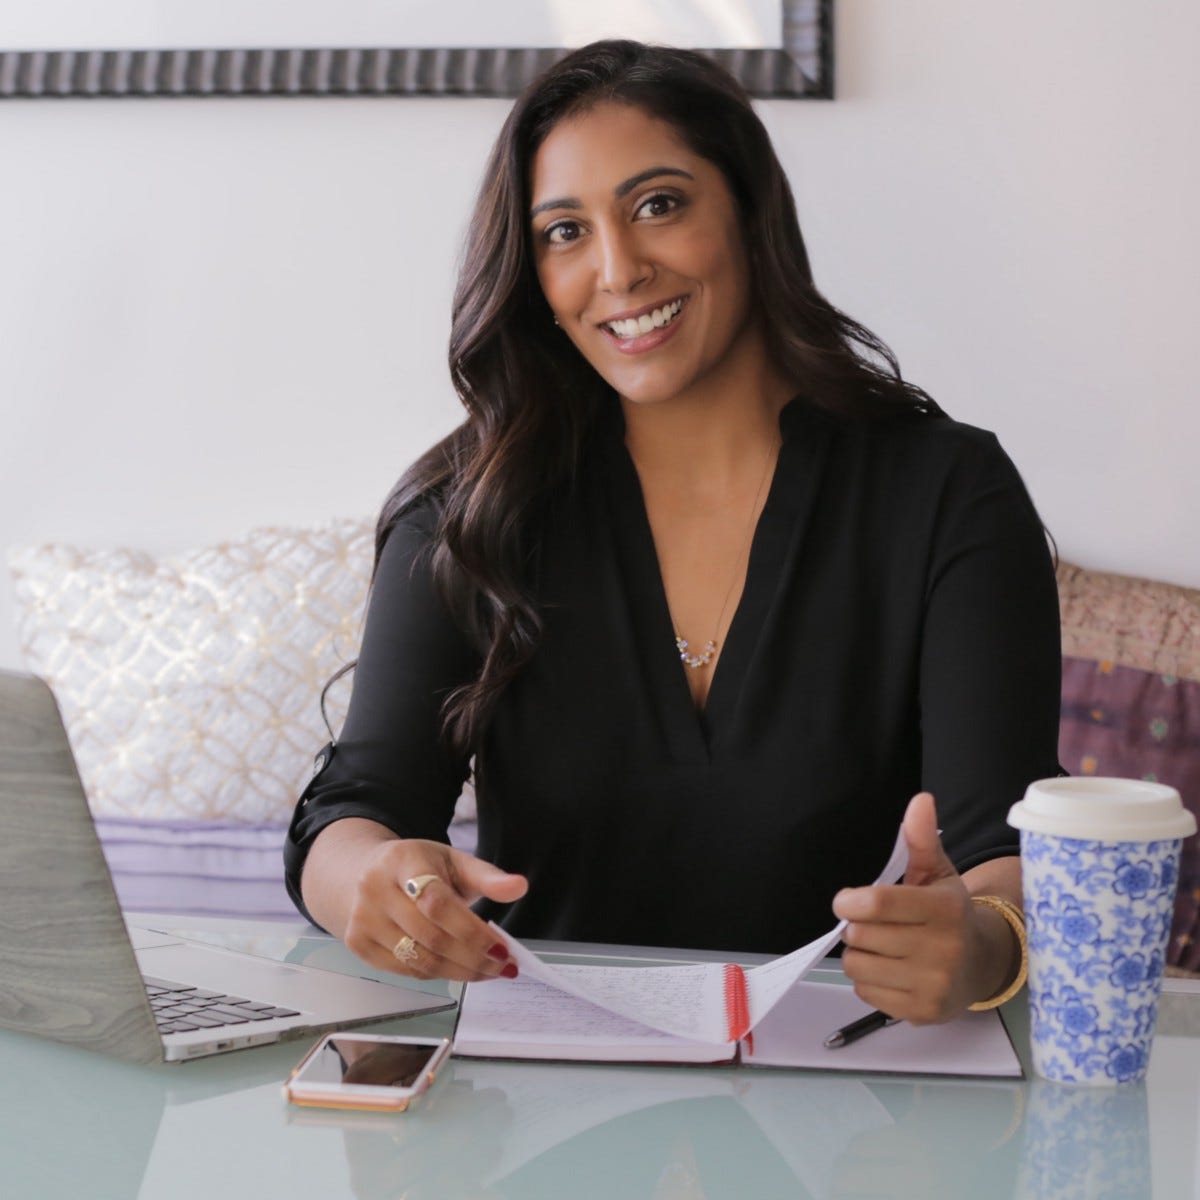 Megha Desai of The Desai Foundation: 5 Things You Need To Know To  Successfully Lead A Nonprofit Organization | by Yitzi Weiner | Authority  Magazine | Medium